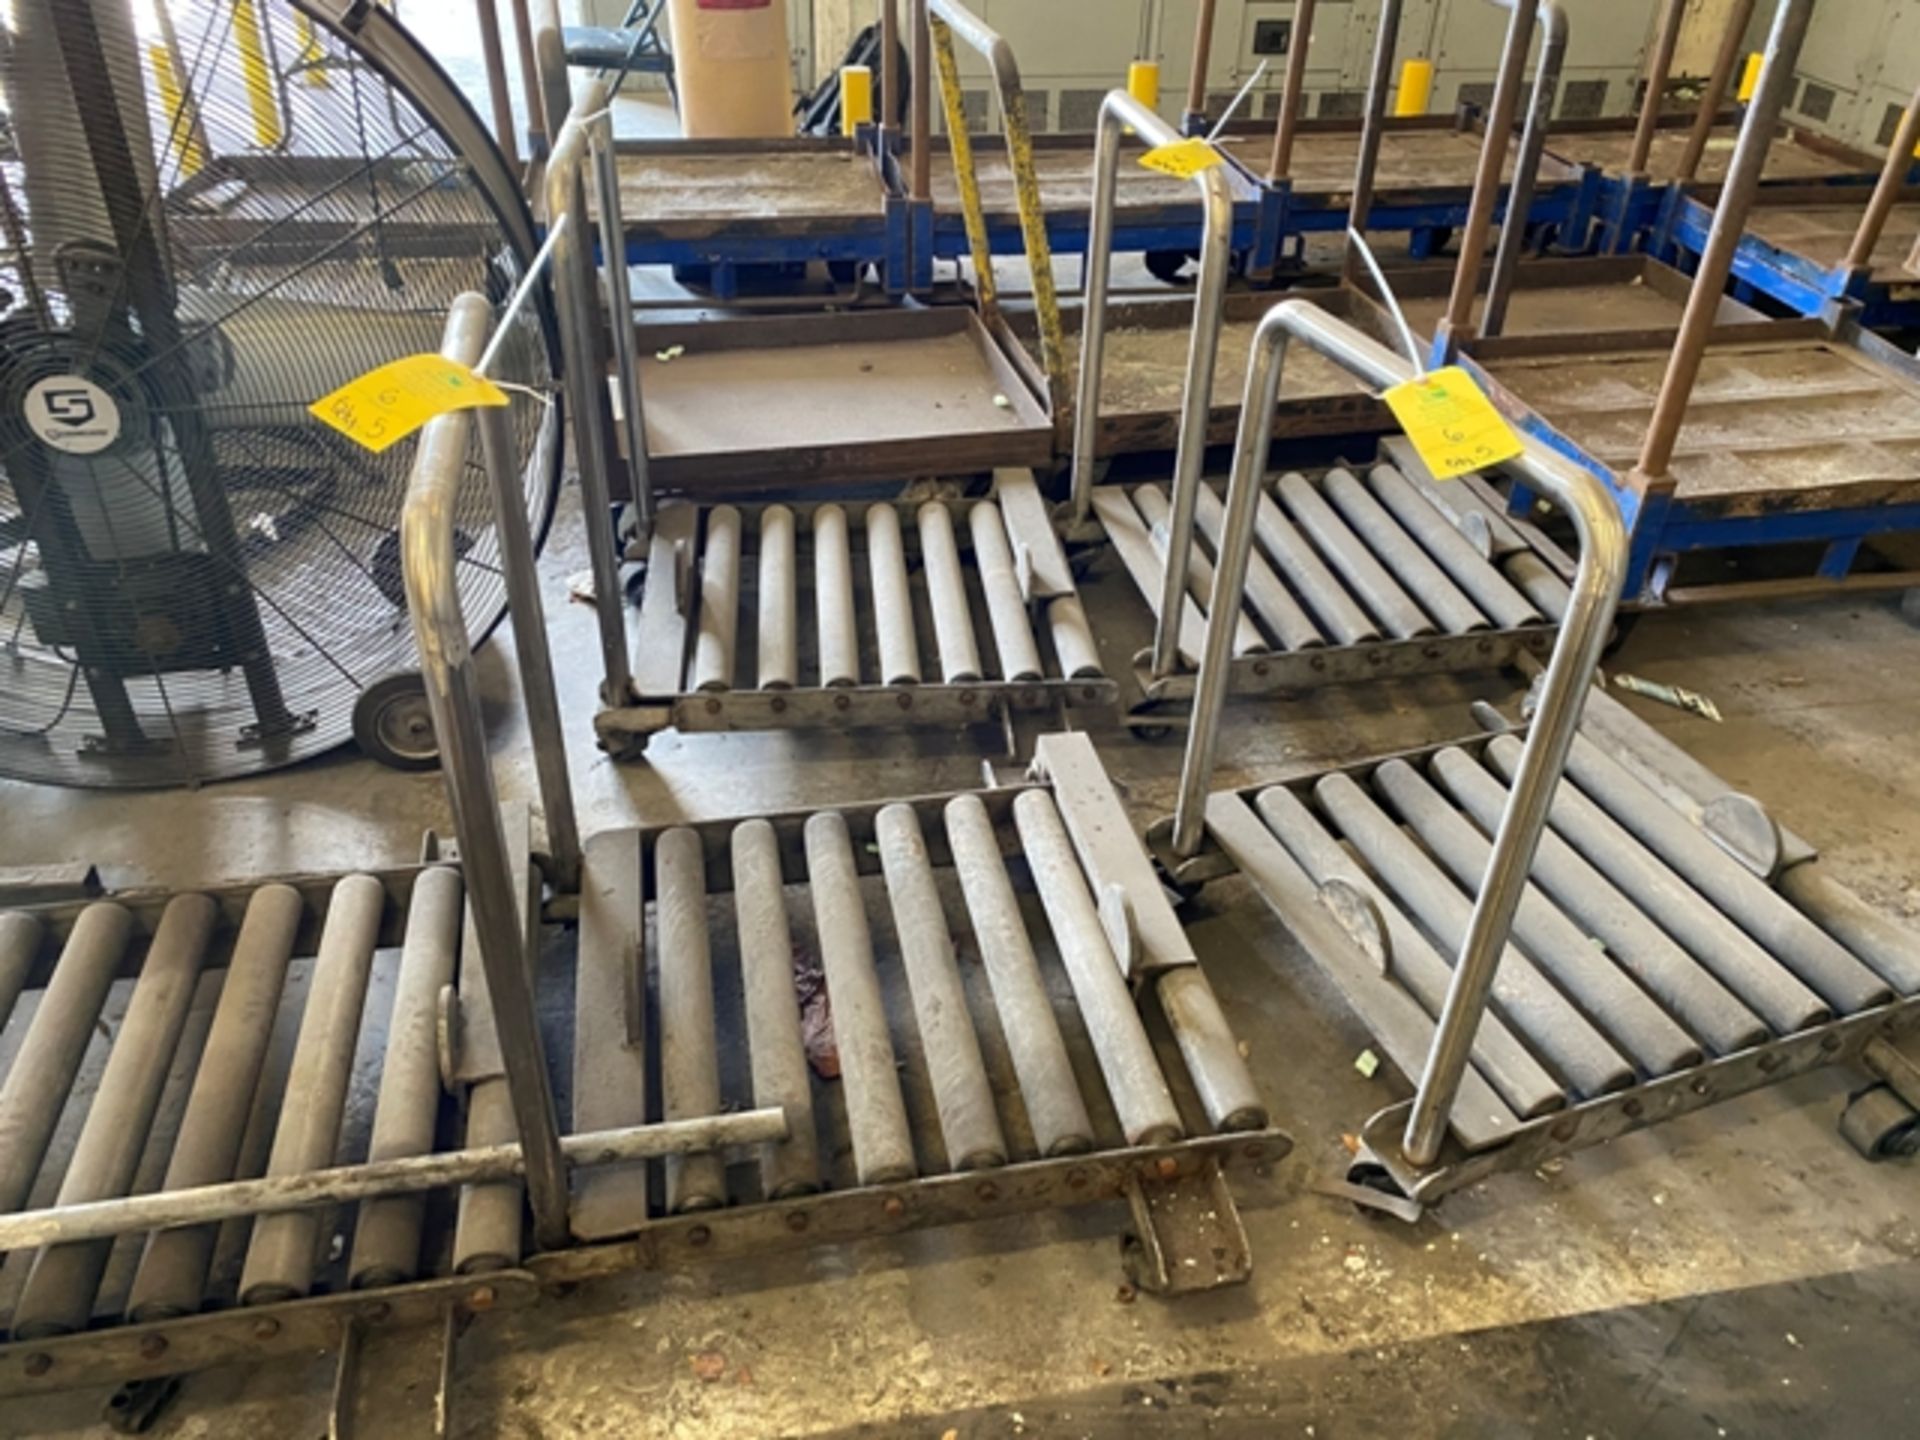 Rolling Carts, Qty. 5 Rigging Price $25